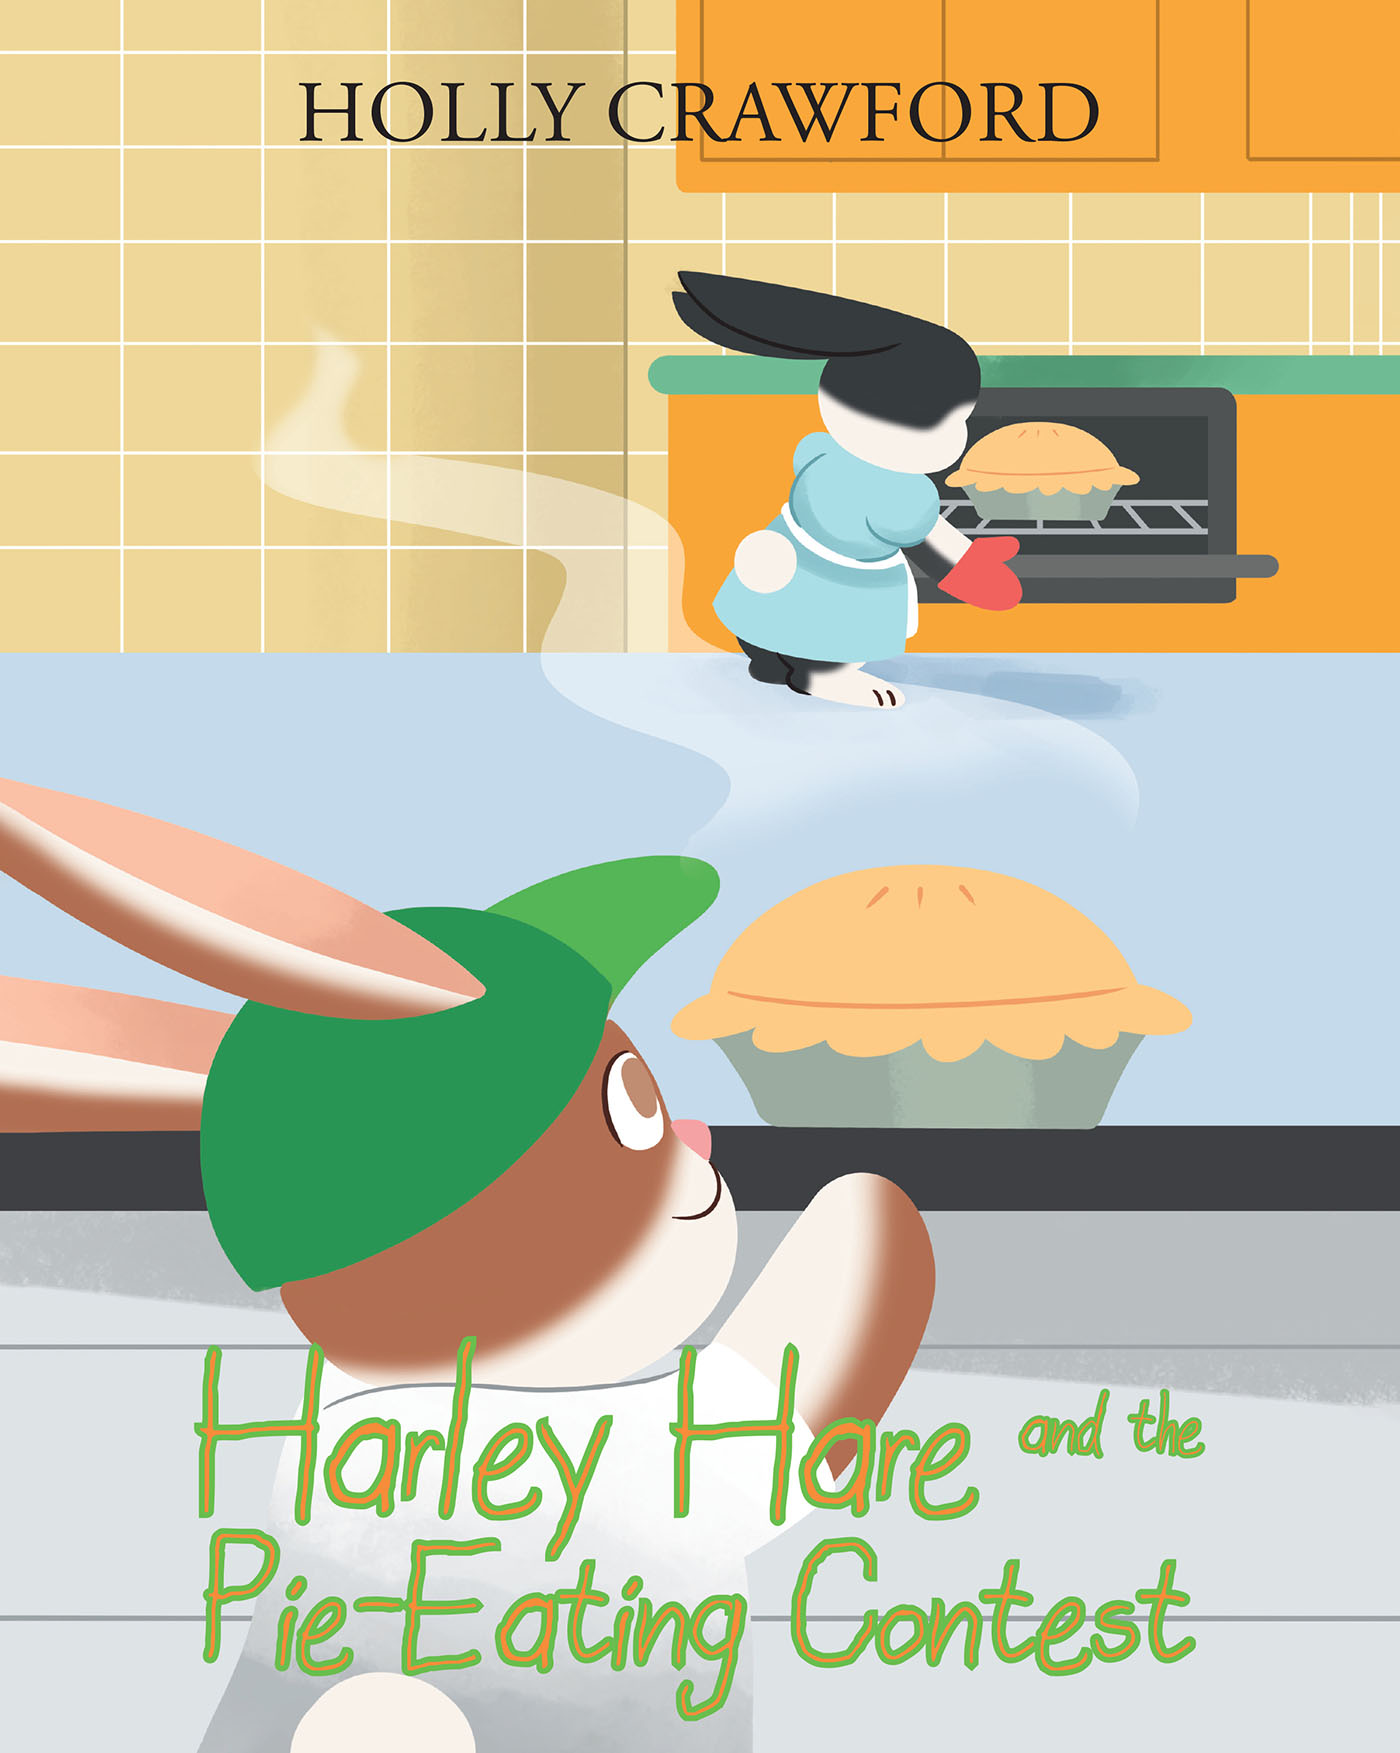 Author Holly Crawford’s New Book, "Harley Hare and the Pie-Eating Contest," Follows a Greedy and Mischievous Rabbit Who Learns the Importance of Patience